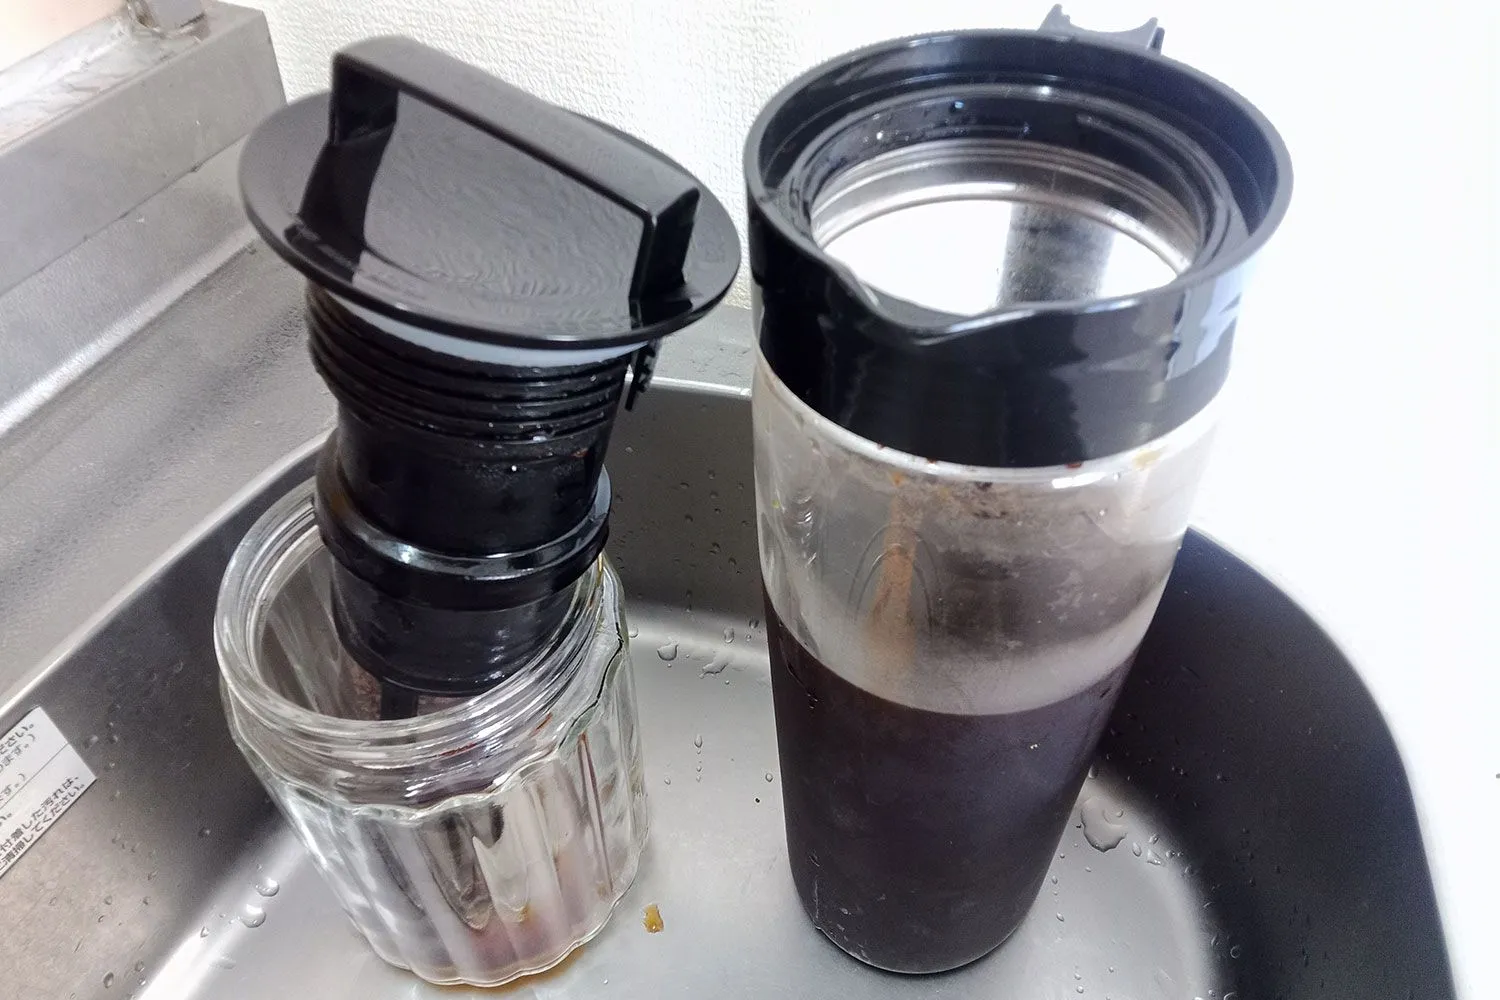 The Takeya Cold Brew Maker: Is It Good for Camping? – Renegade Camping & EDC